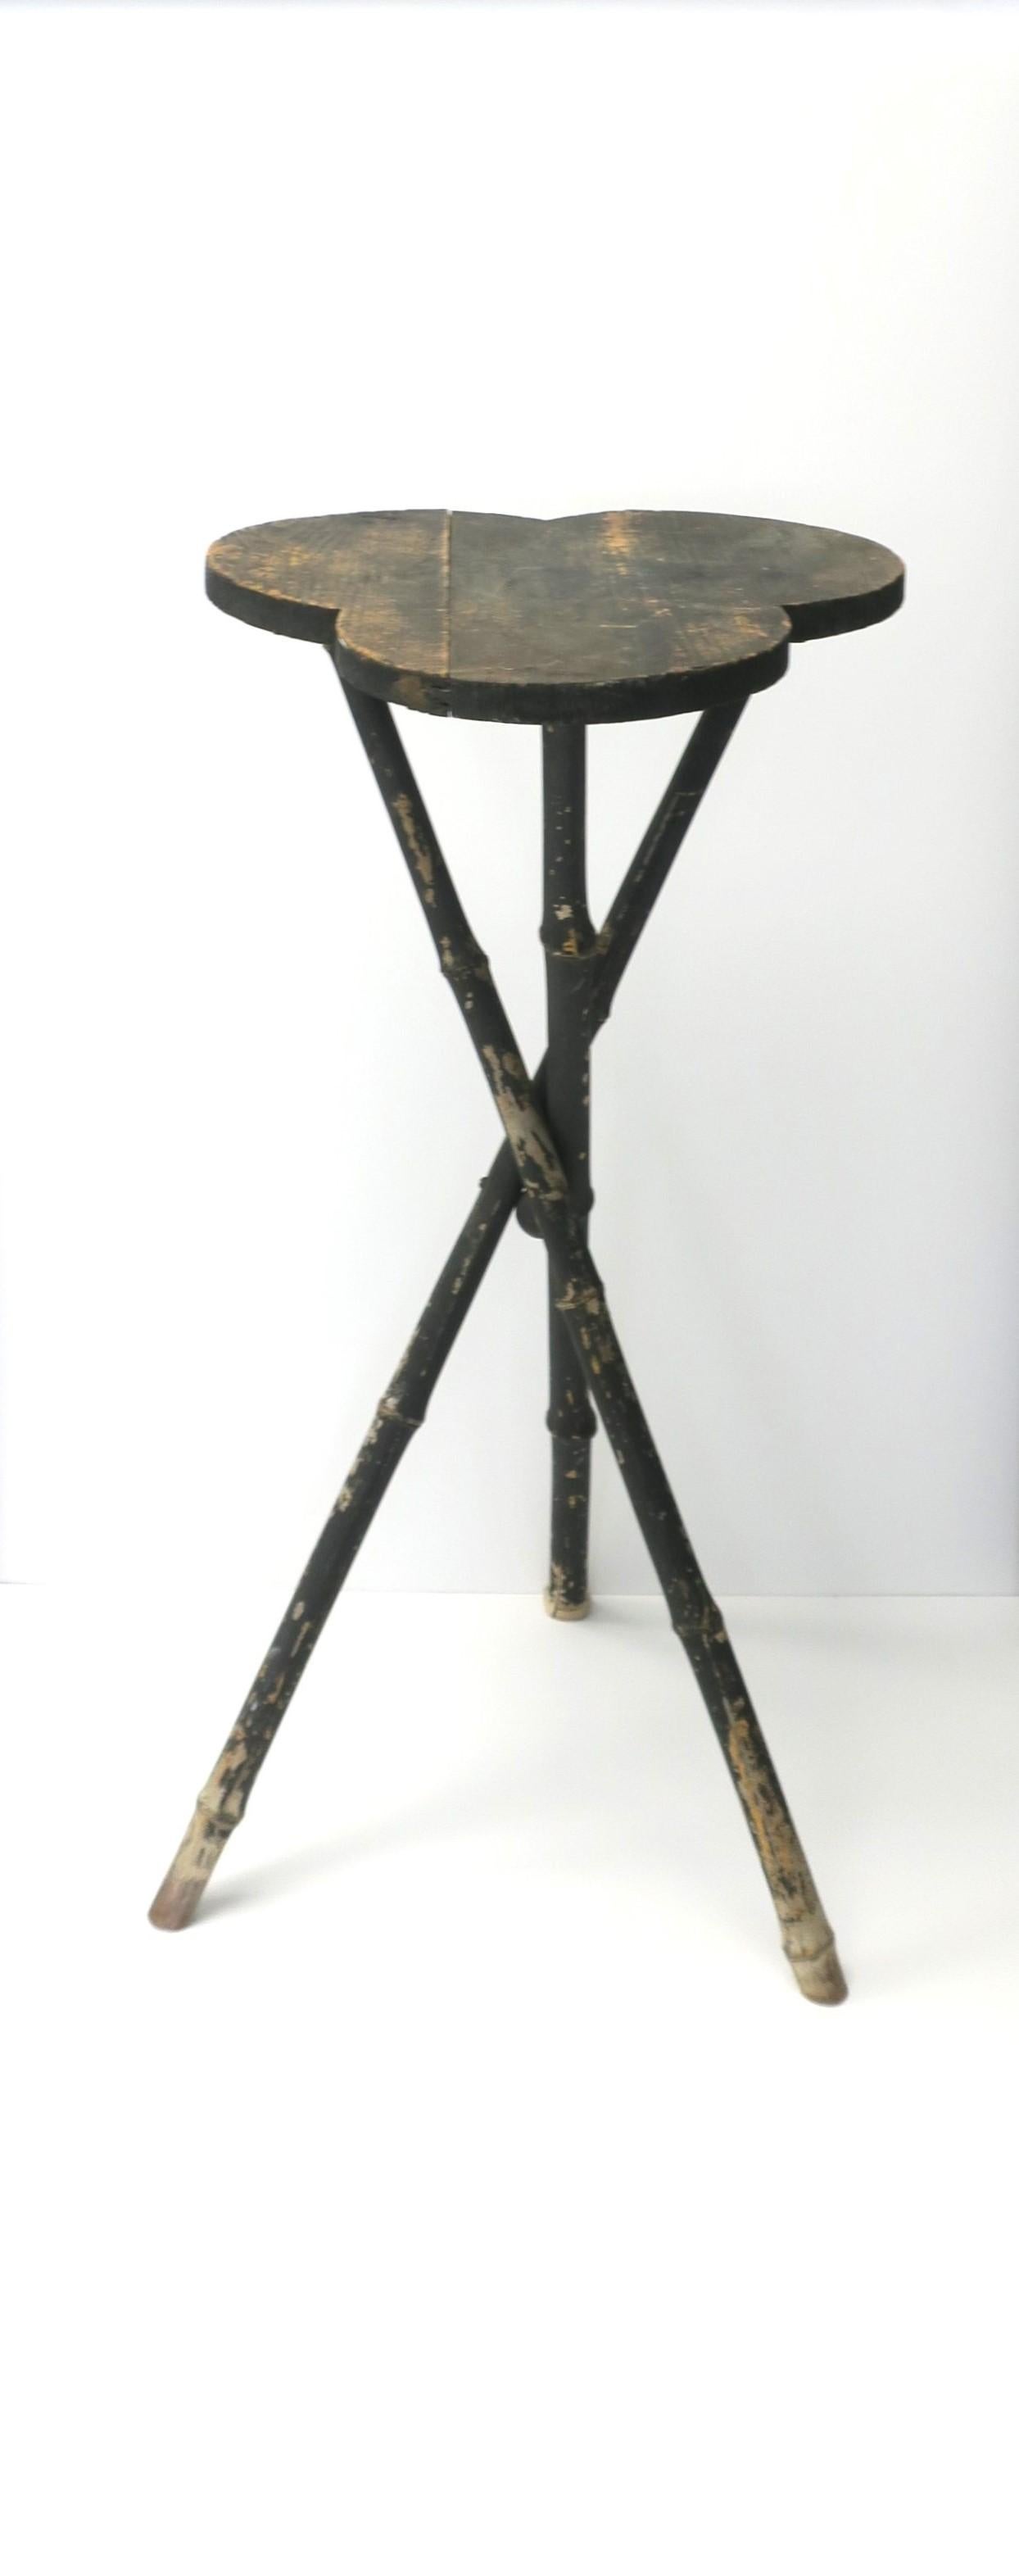 A rustic wood and bamboo side, accent, or plant stand table, with French Trefle-like top design, and bamboo tri-pod base, circa late-20th century. Tables' wood top has a 'trefle' clover-like design and tri-pod bamboo base legs. Piece is lightweight